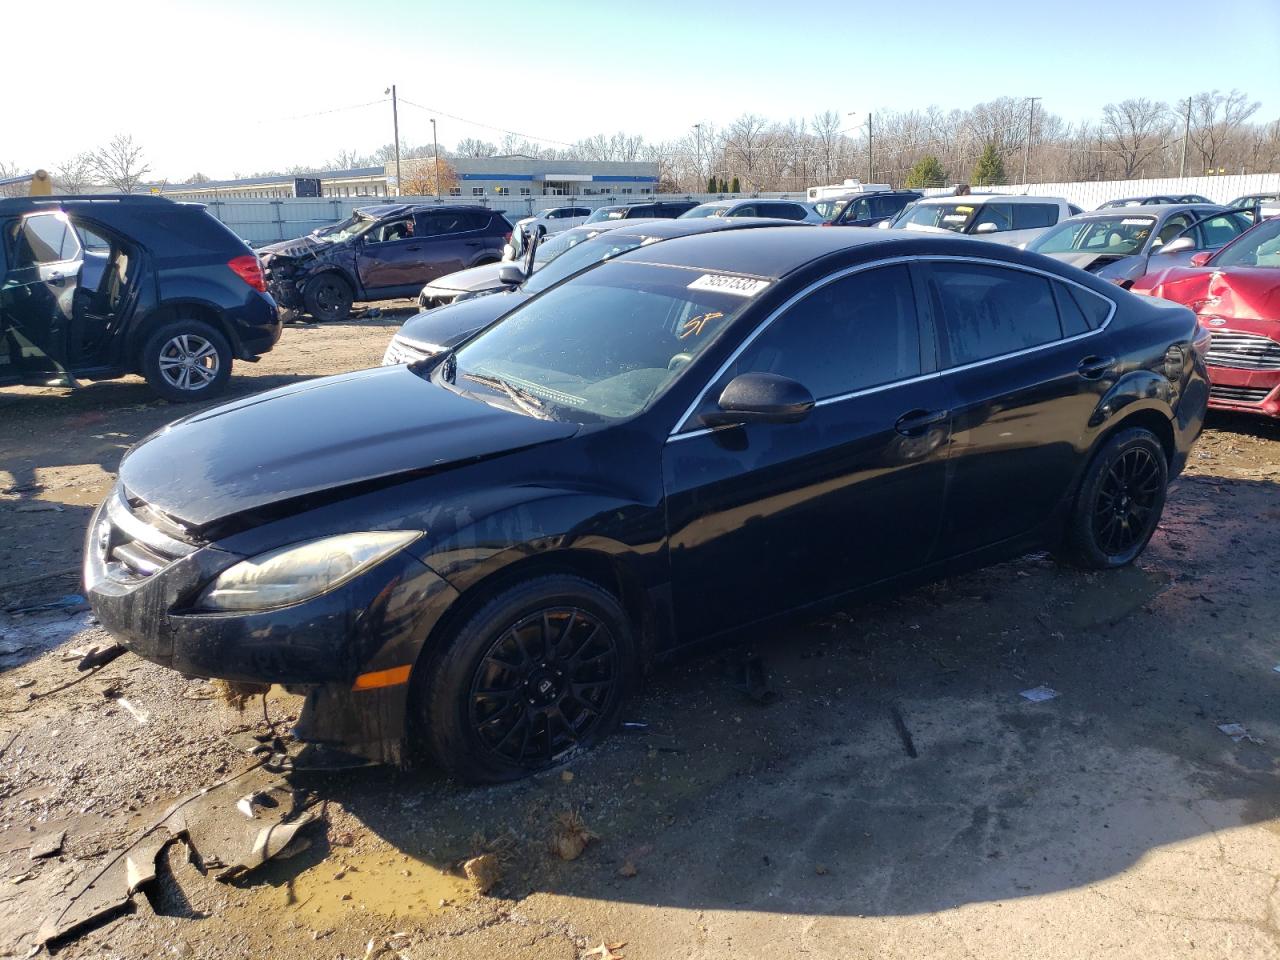 vin: 1YVHZ8BHXC5M28203 1YVHZ8BHXC5M28203 2012 mazda 6 2500 for Sale in 40272 2985, Ky - Louisville, Louisville, USA